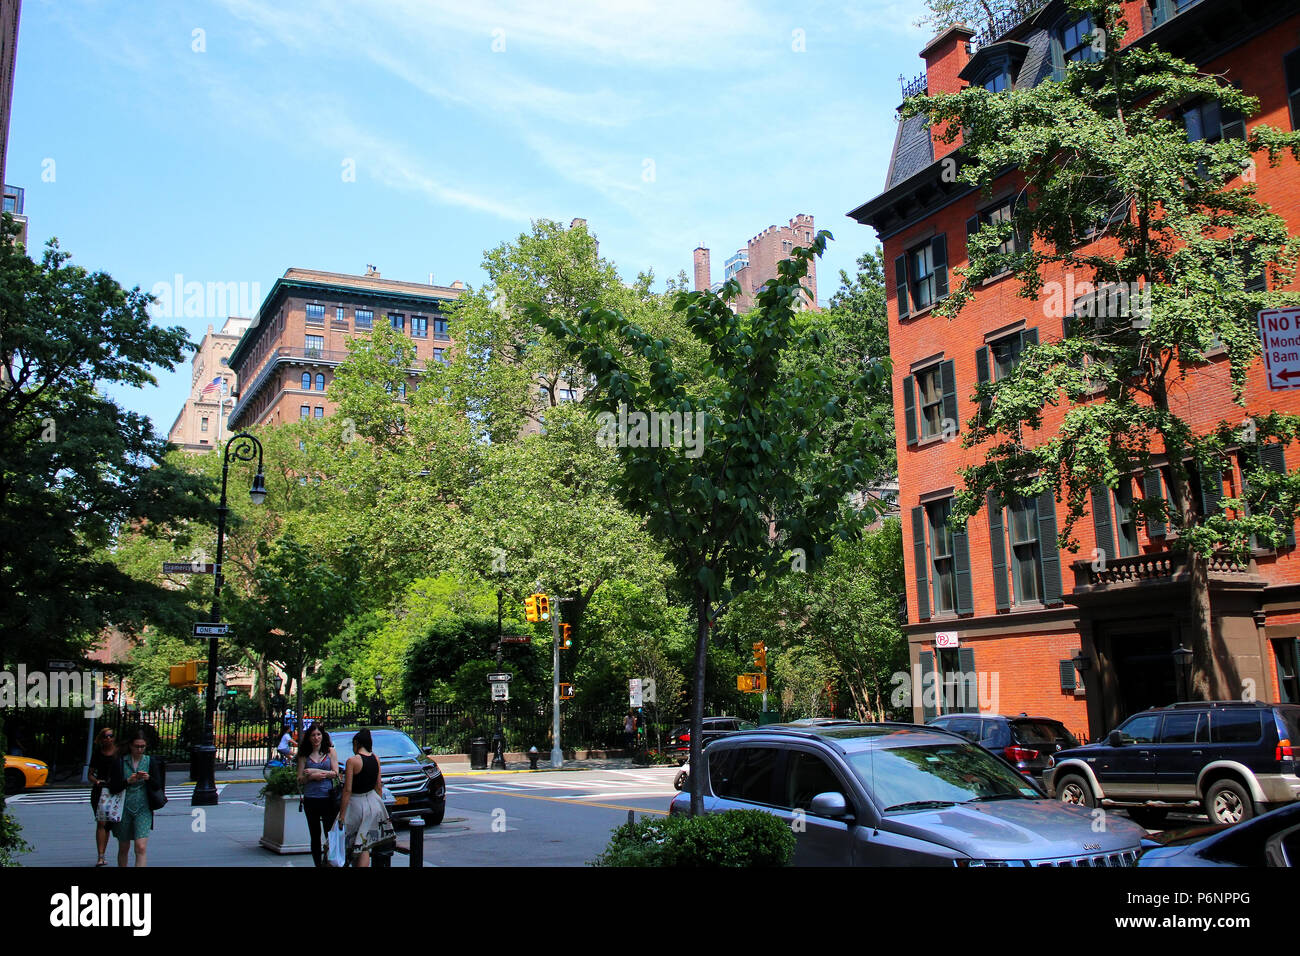 NEW YORK, NY - JUNE 22: Corner of Irving Place and Gramercy Park South, Gramercy Park Historic District, Manhattan on JUNE 22nd, 2017 in New York, USA Stock Photo